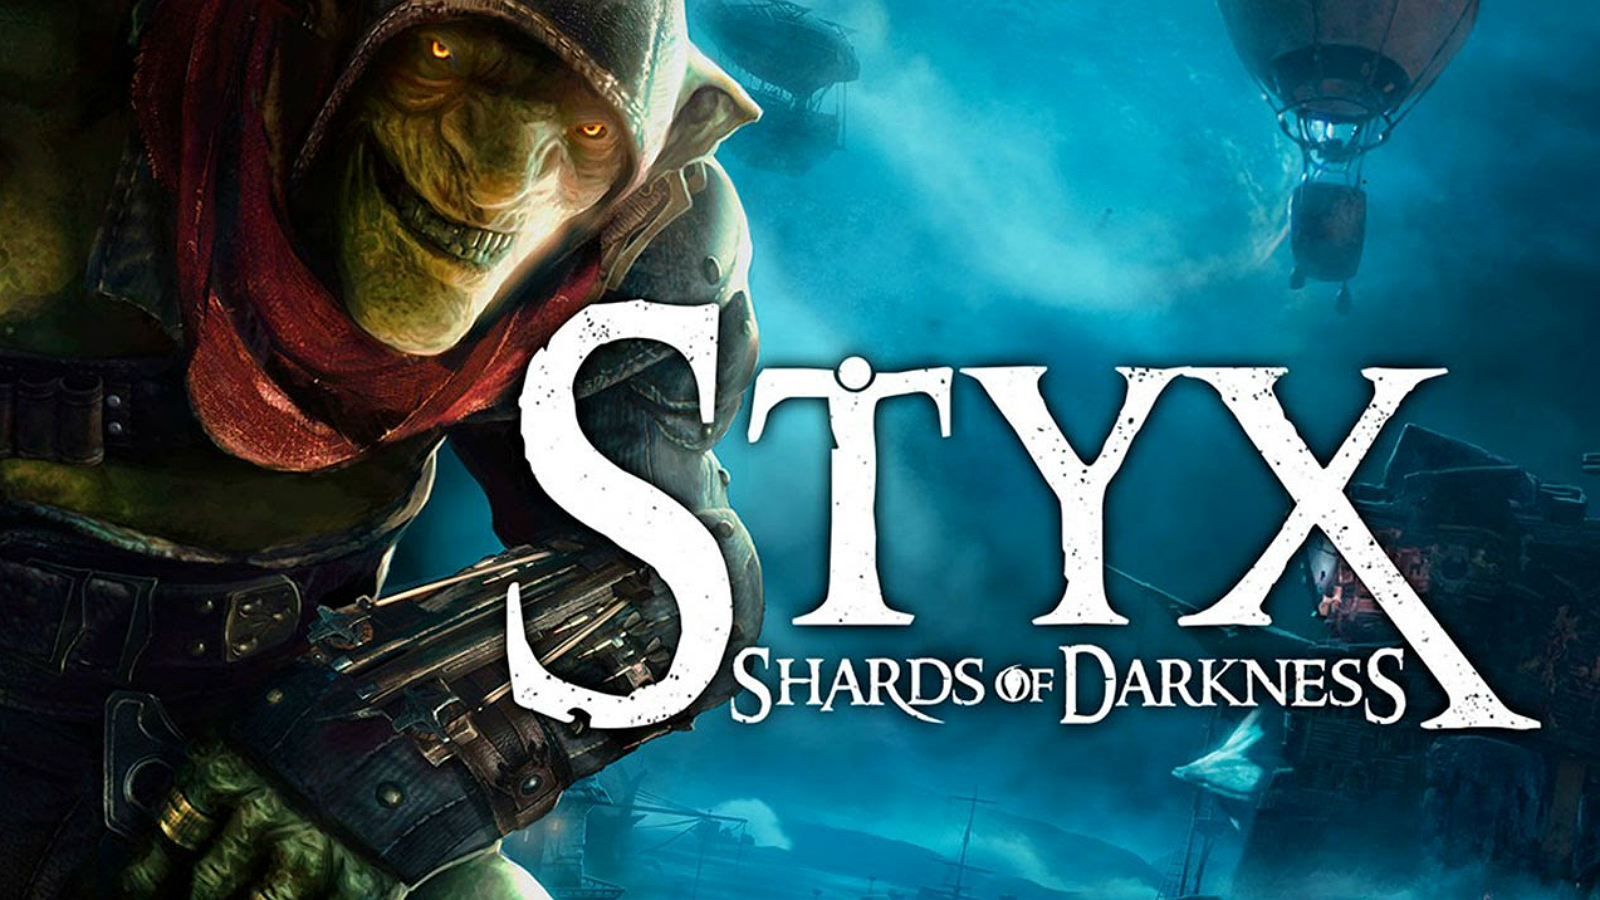 Styx: Shards Of Darkness Review Header Image Featuring Character Art And Game Logo